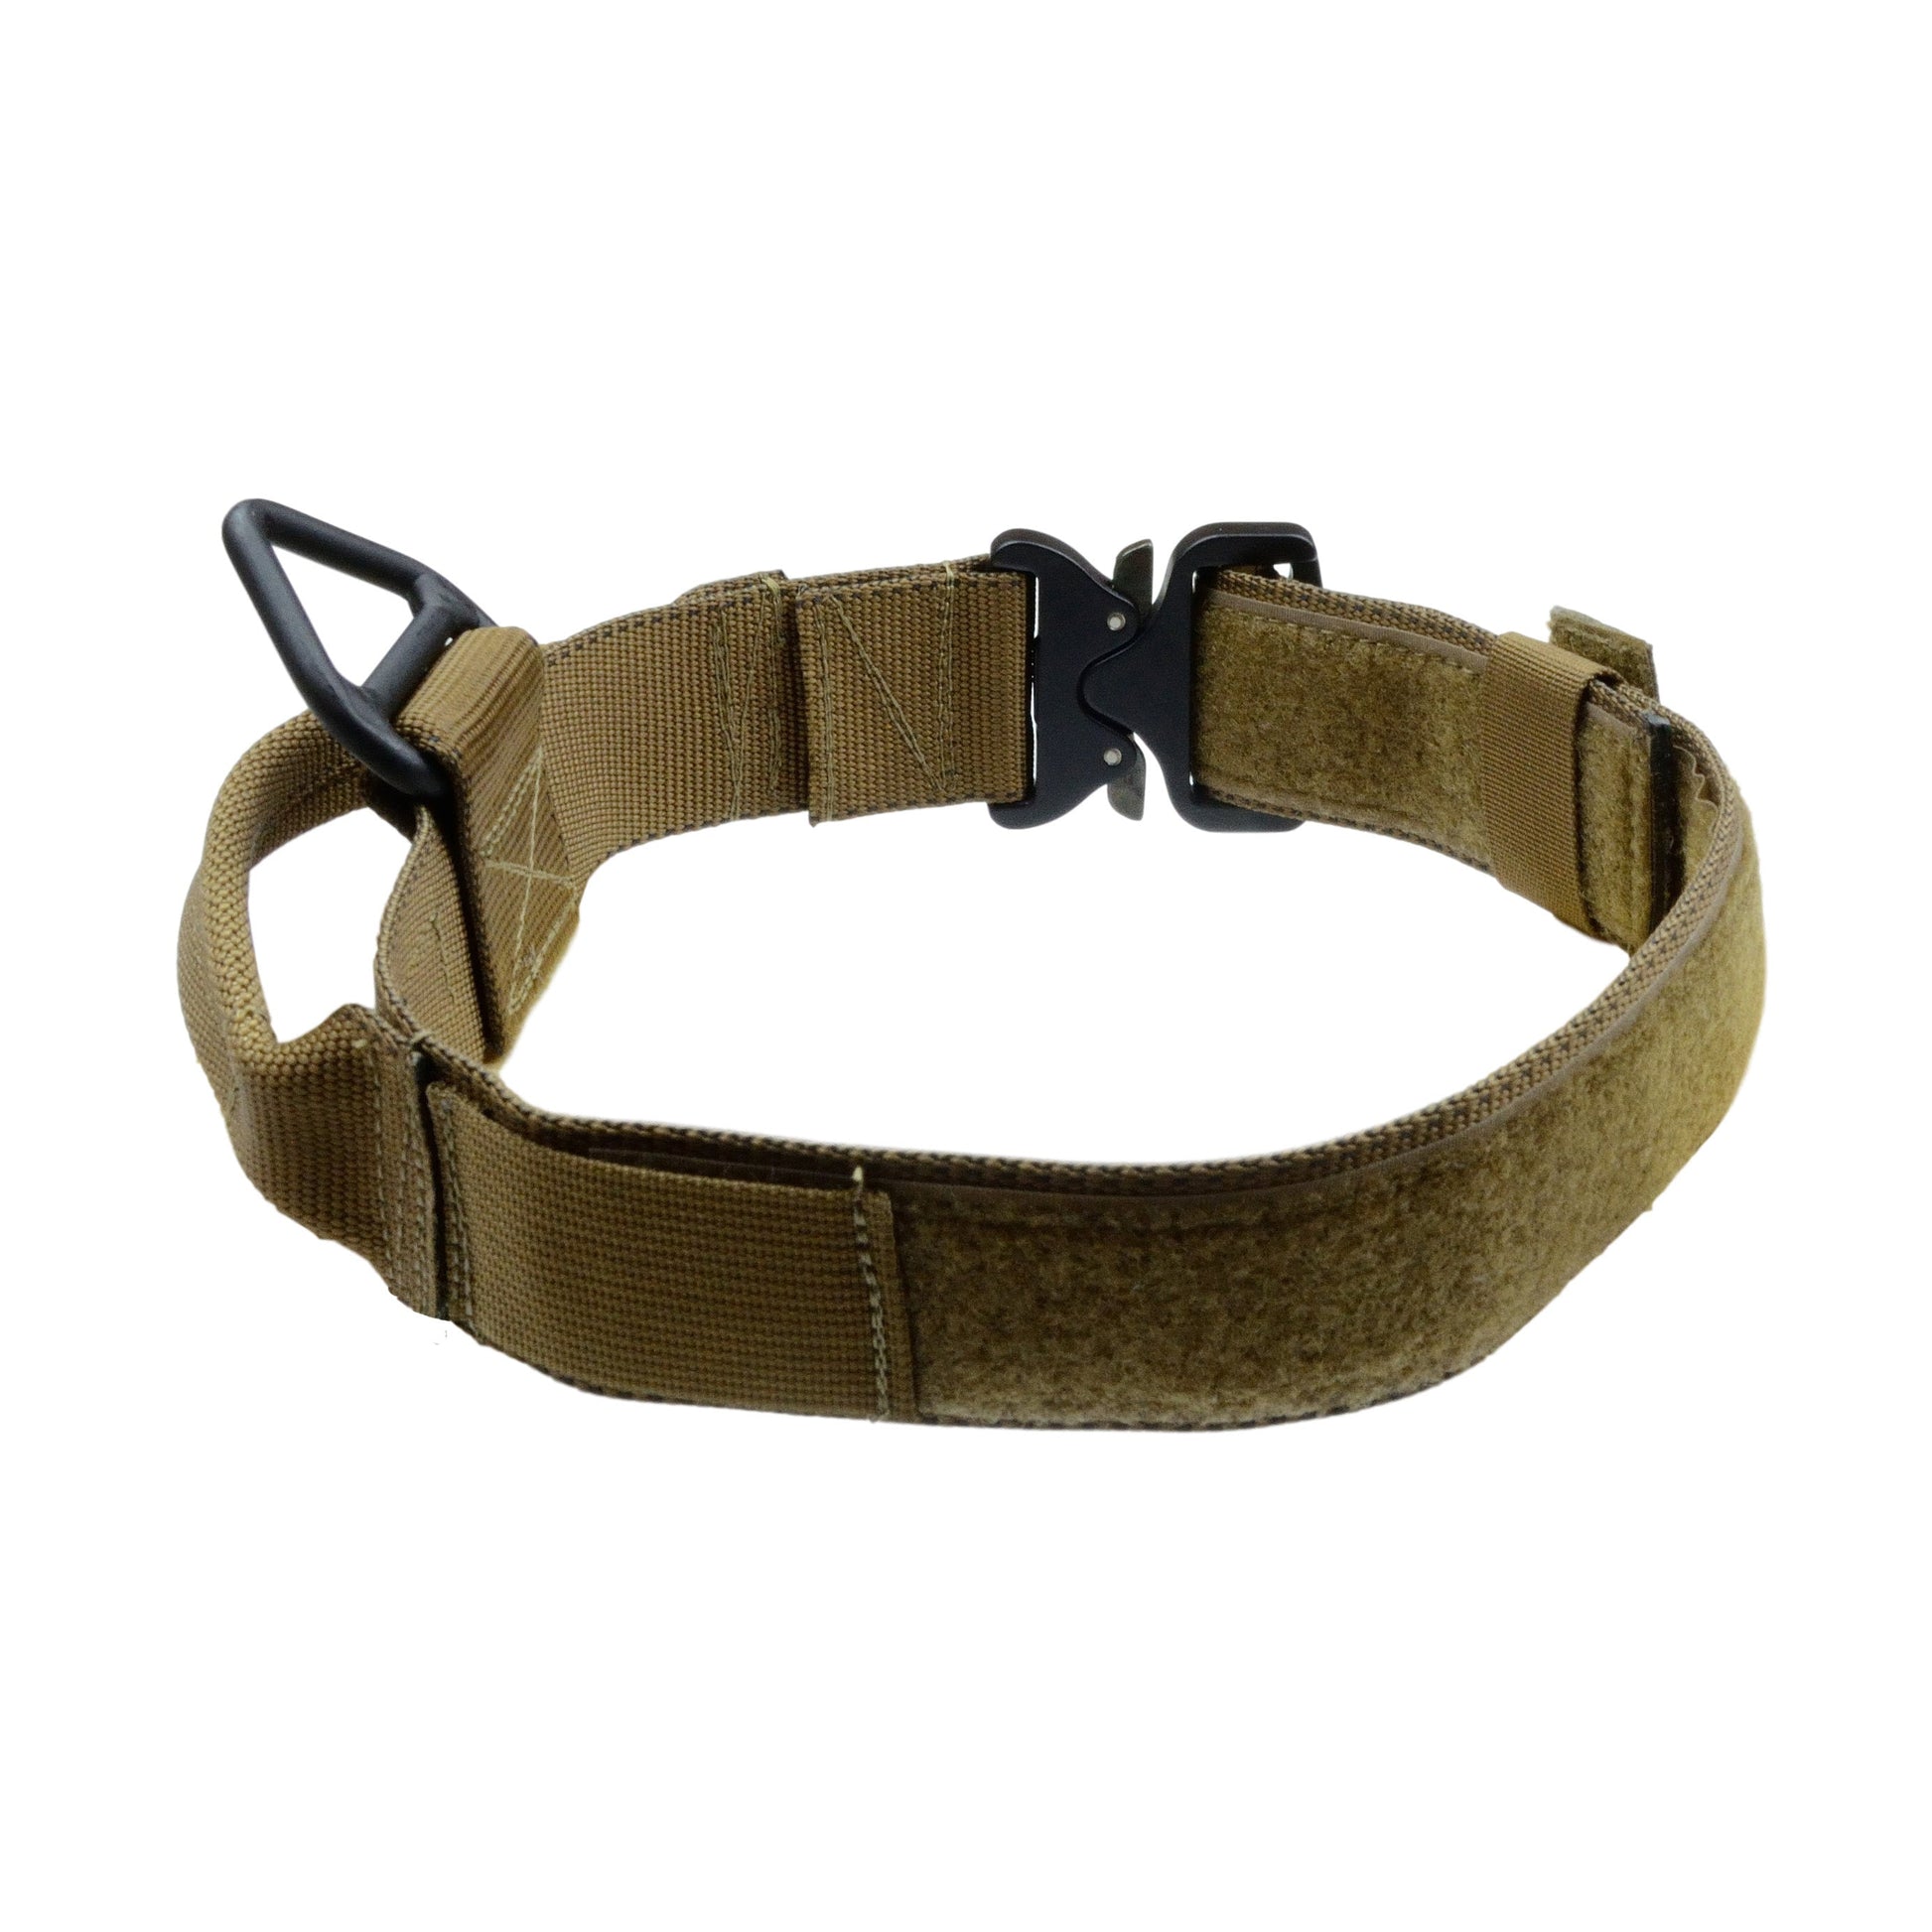 Redline K-9 MaxTac Service ID Collar With Cobra Buckle - Coyote Brown –  DogSport Gear